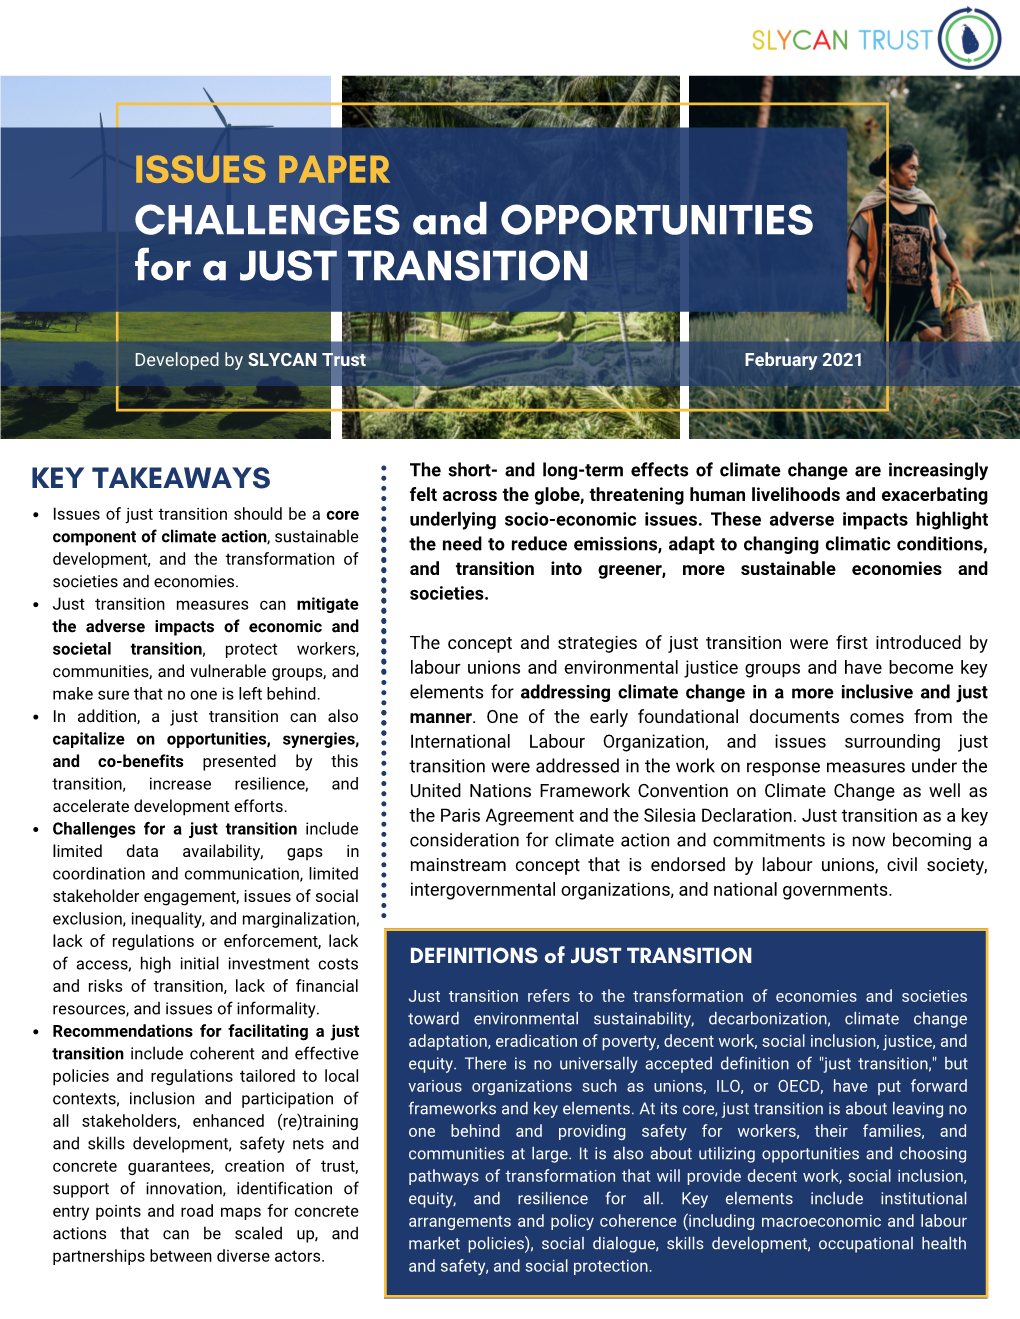 Issues Paper on Challenges and Opportunities for a Just Transition